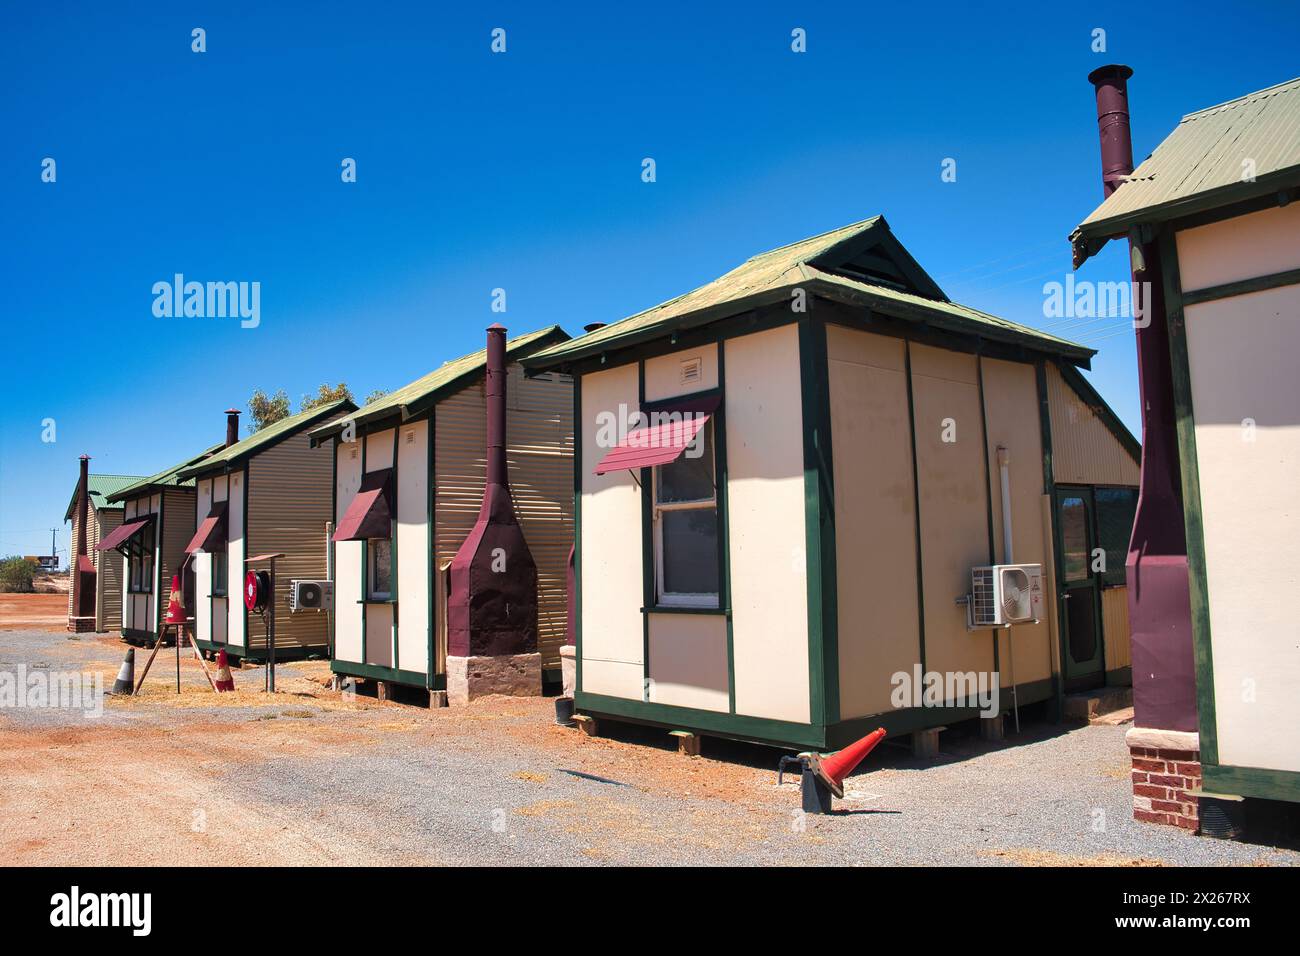 Traditional cottages for miners and tourists in the outback town of Cue, Western Australia Stock Photo